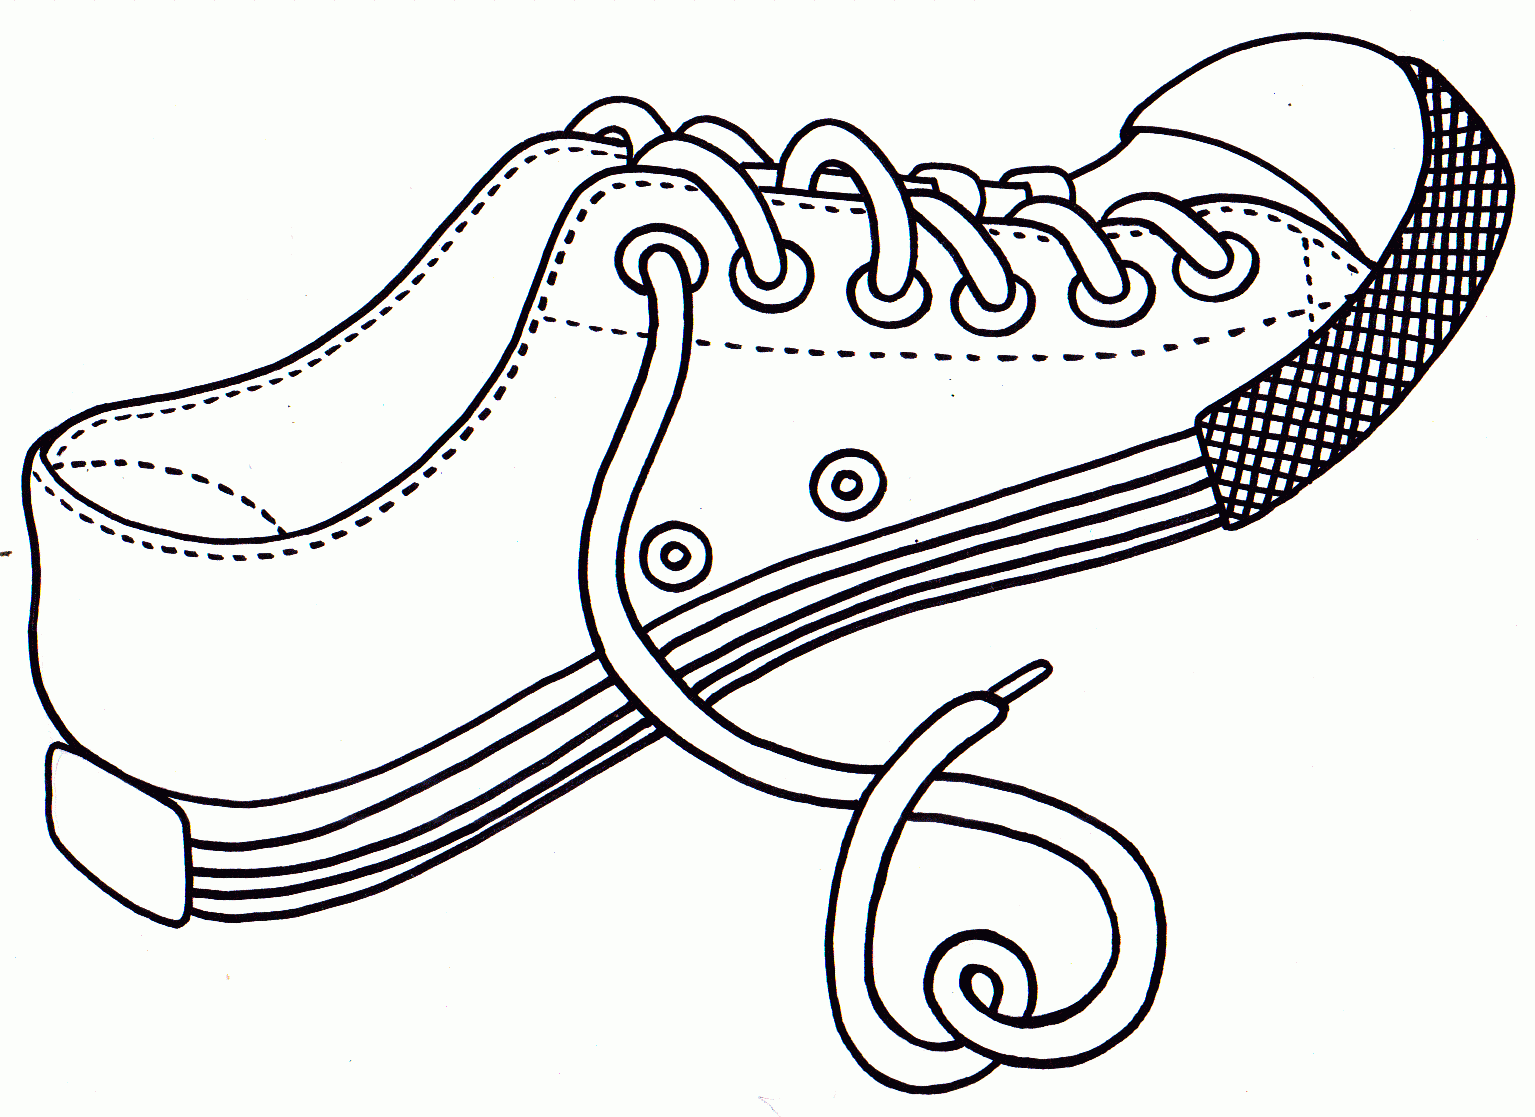 coloring-pages-shoes-printable-coloring-home